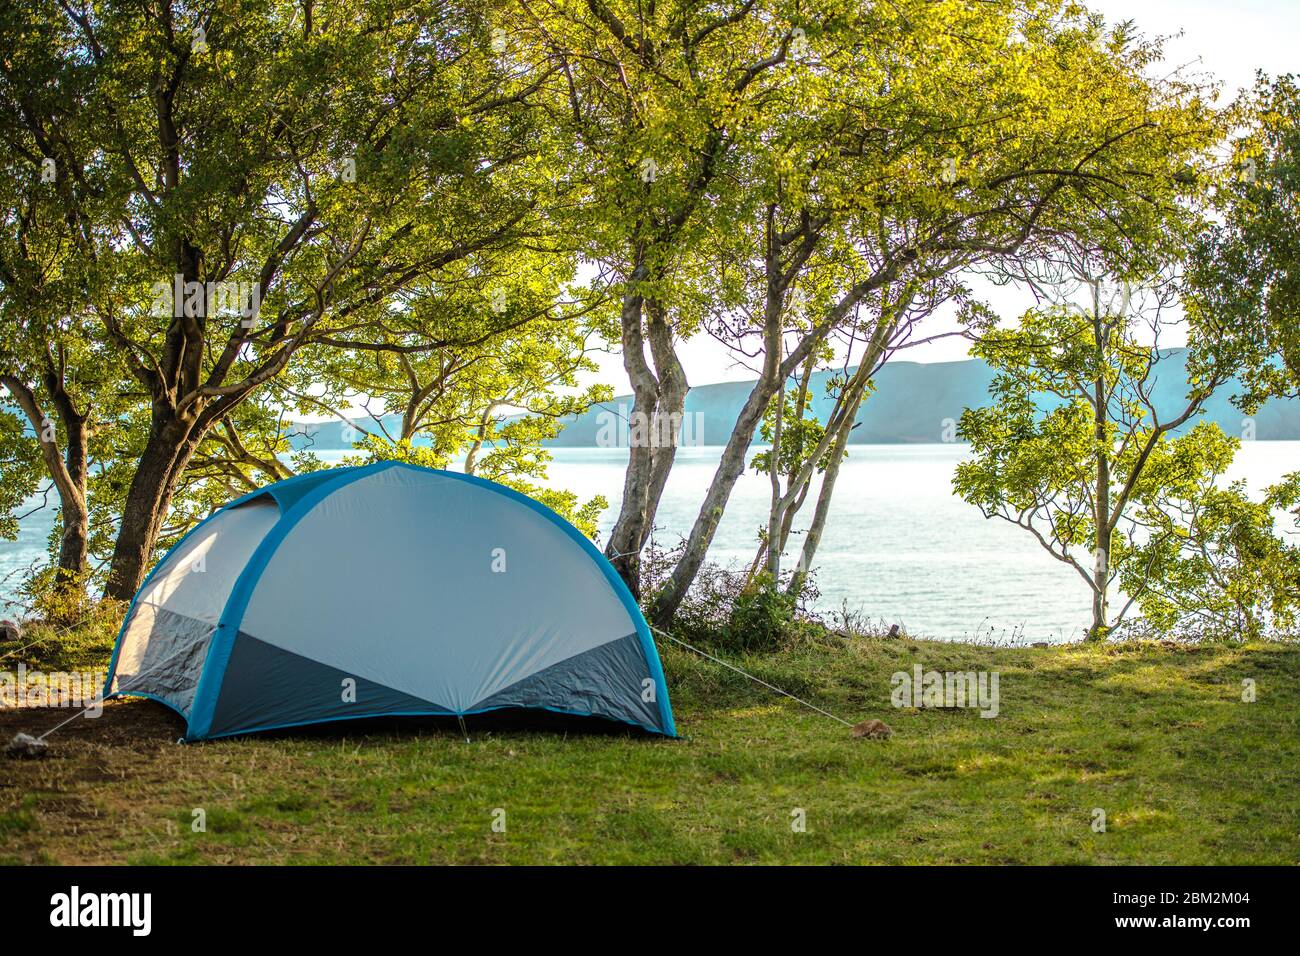 View Of Blue Small Tent Pitched On Shaded By Trees Area Near Lake And Mountains. Stock Photo